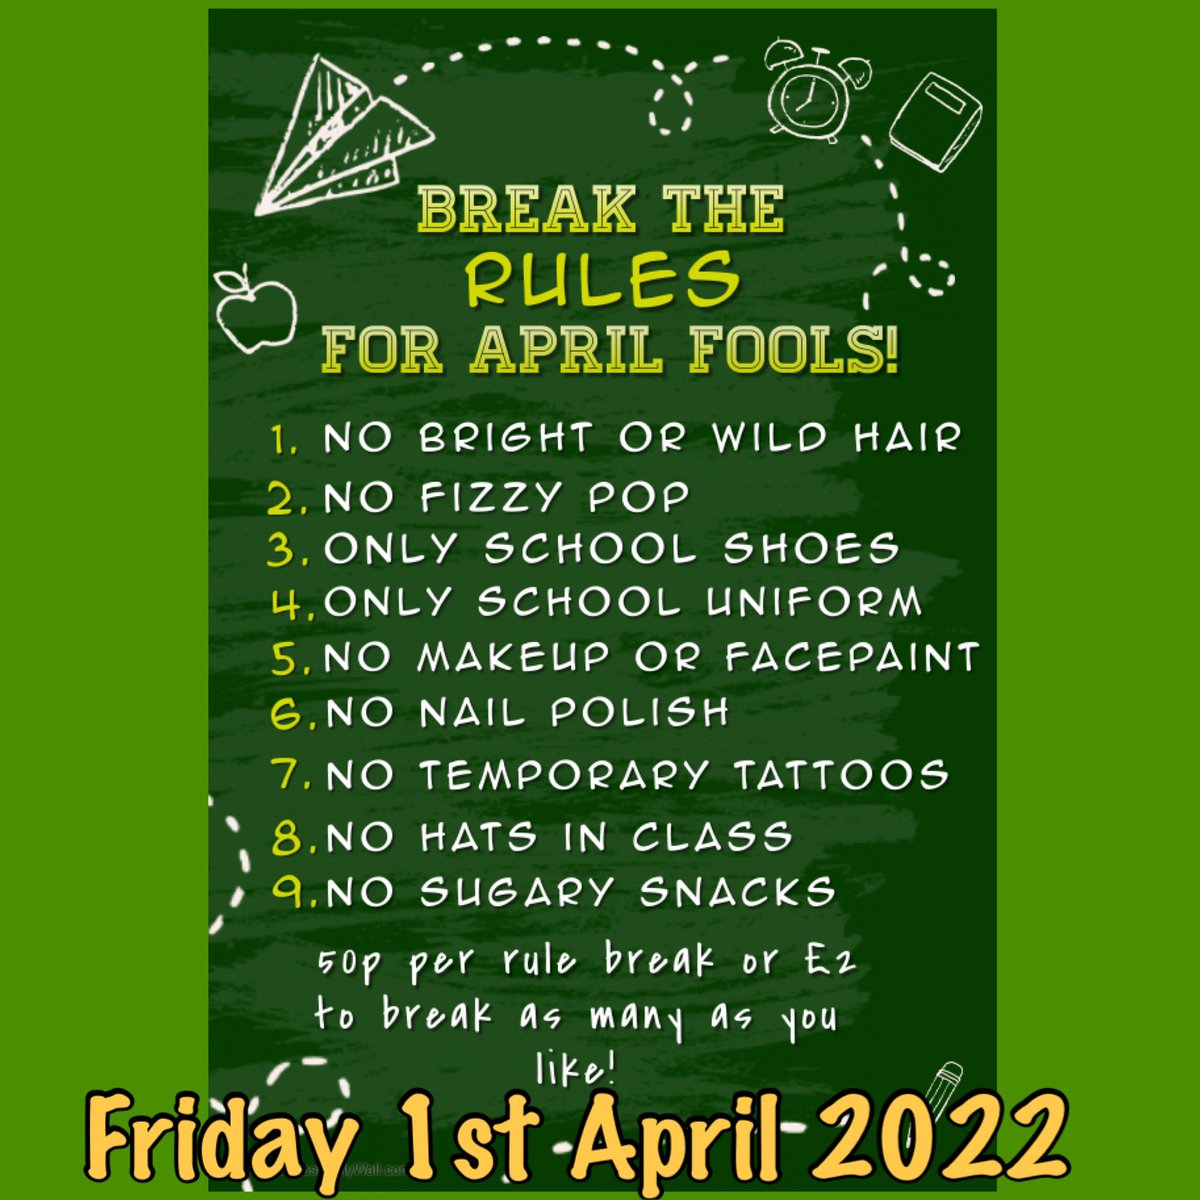 Break the rules for April fools, Friday 1st April. All donations will be sent to the British Red Cross Ukraine Crisis Appeal💚